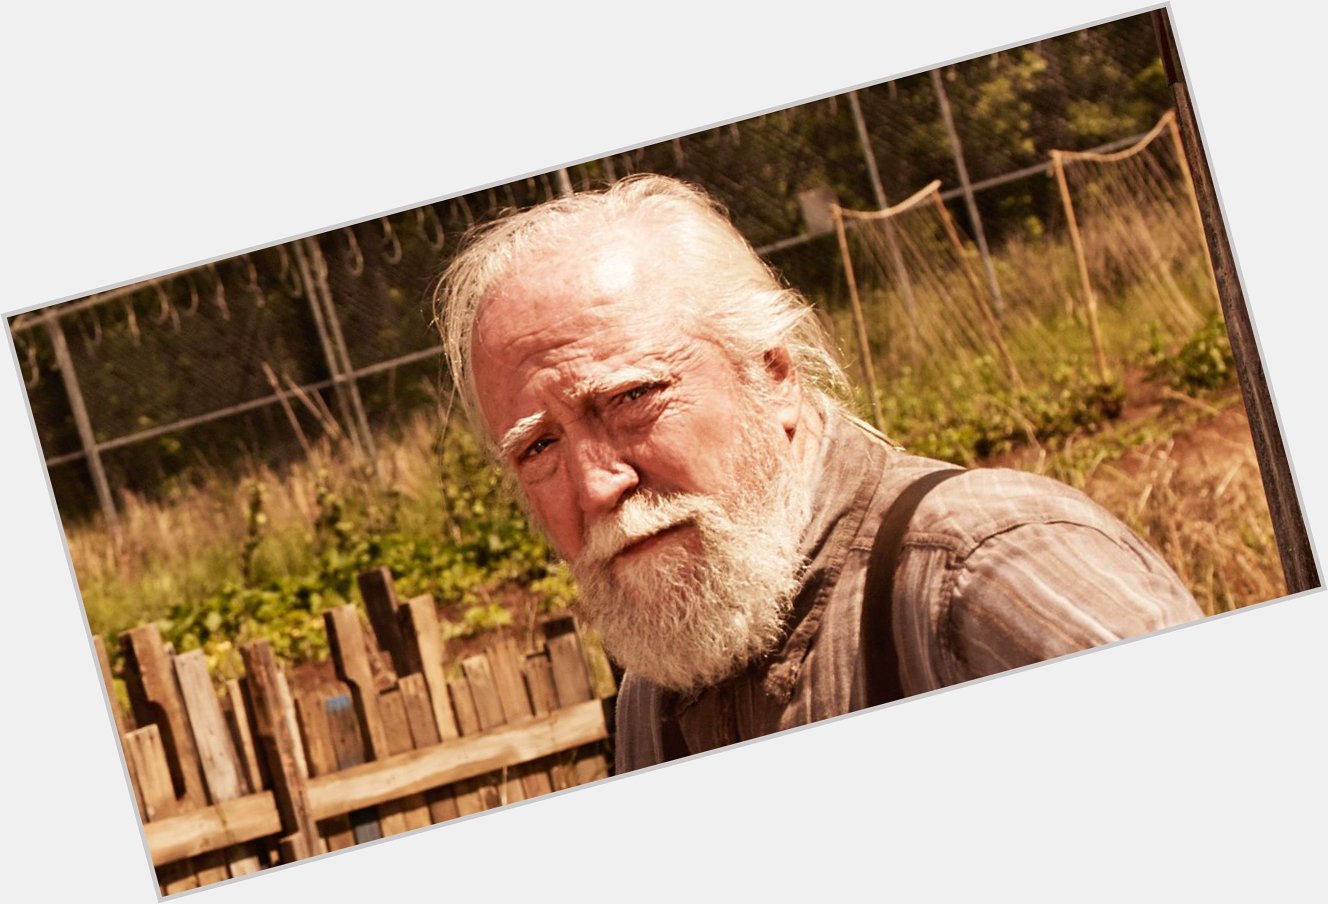 Happy Heavenly birthday to Scott Wilson, who would have been 79 today.  